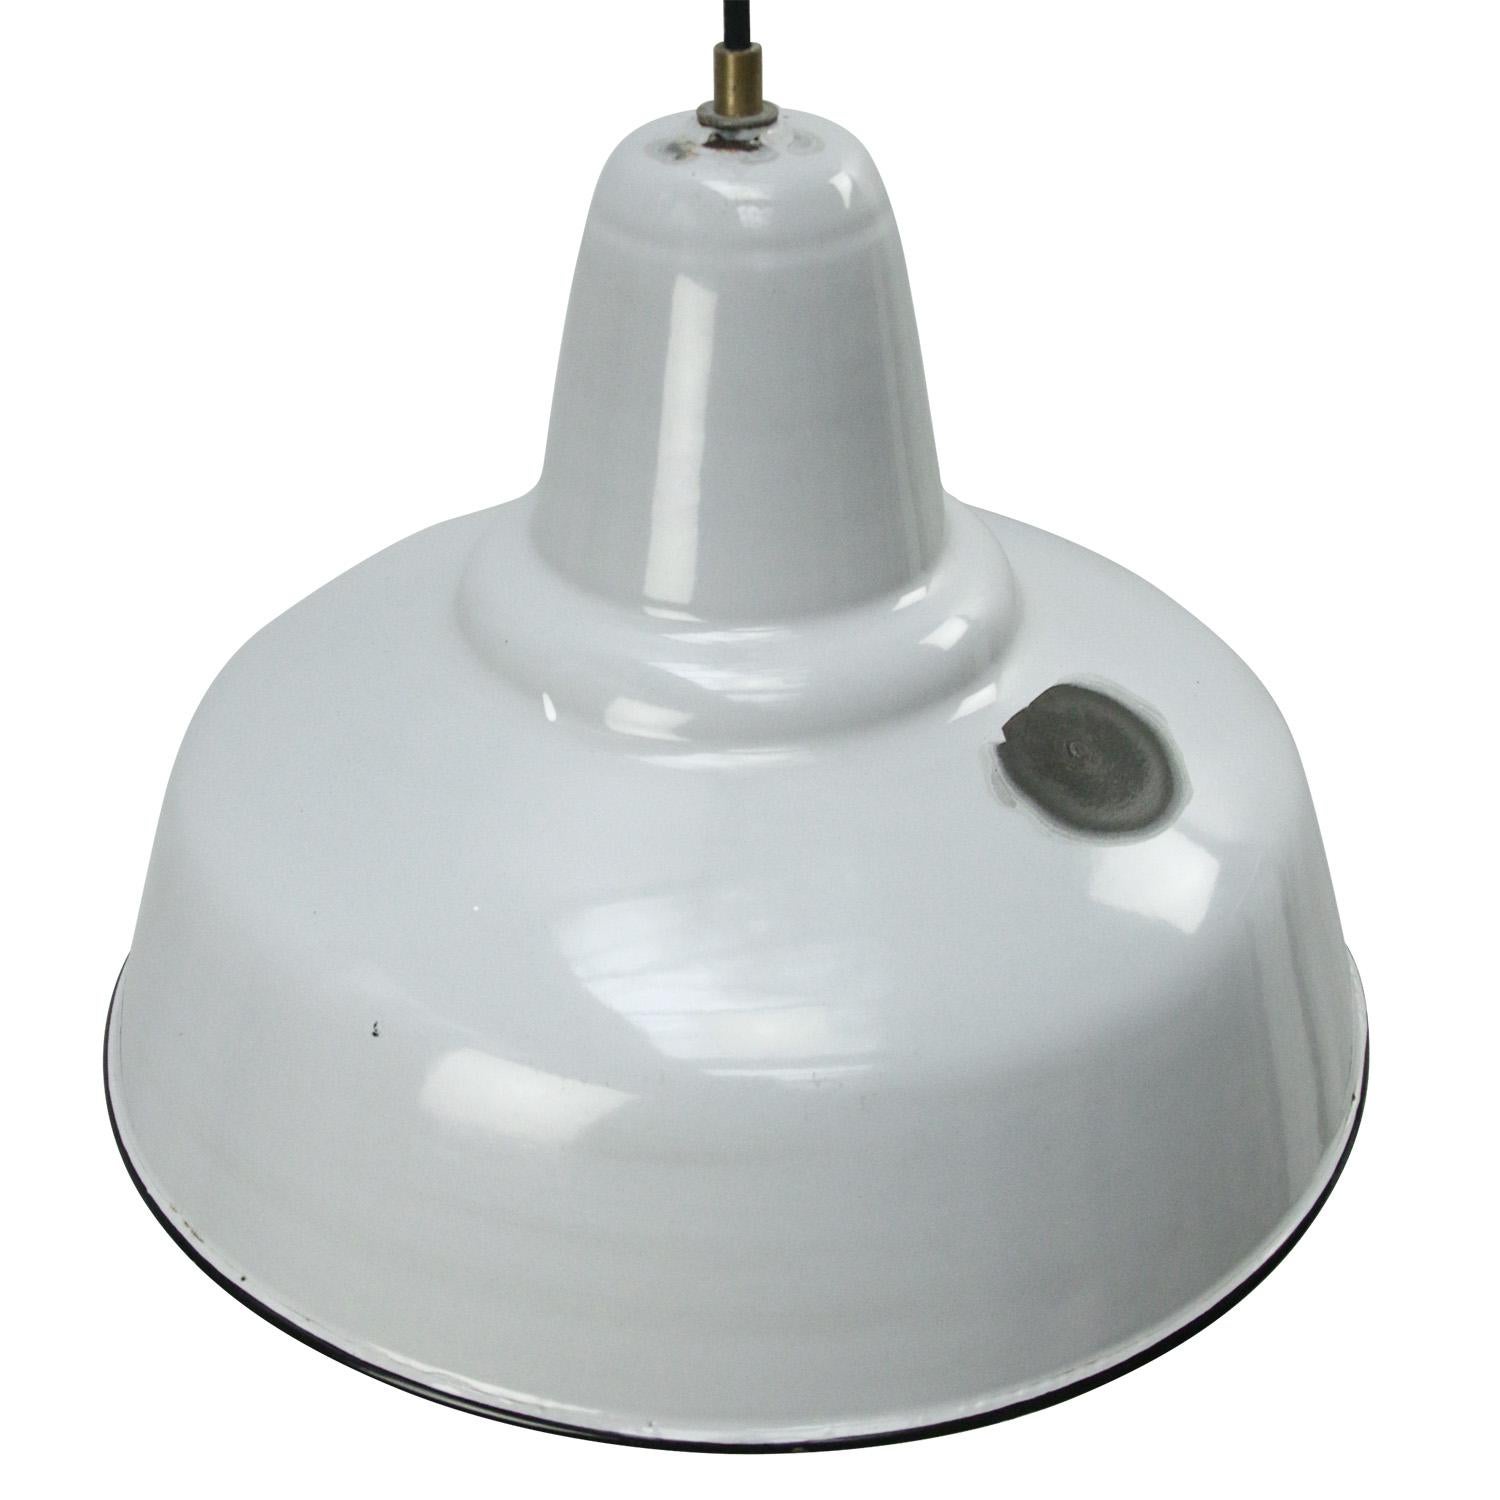 Dutch industrial hanging lamp by Philips.
Grey enamel white interior.

Weight: 2.00 kg / 4.4 lb.

Priced per individual item. All lamps have been made suitable by international standards for incandescent light bulbs, energy-efficient and LED